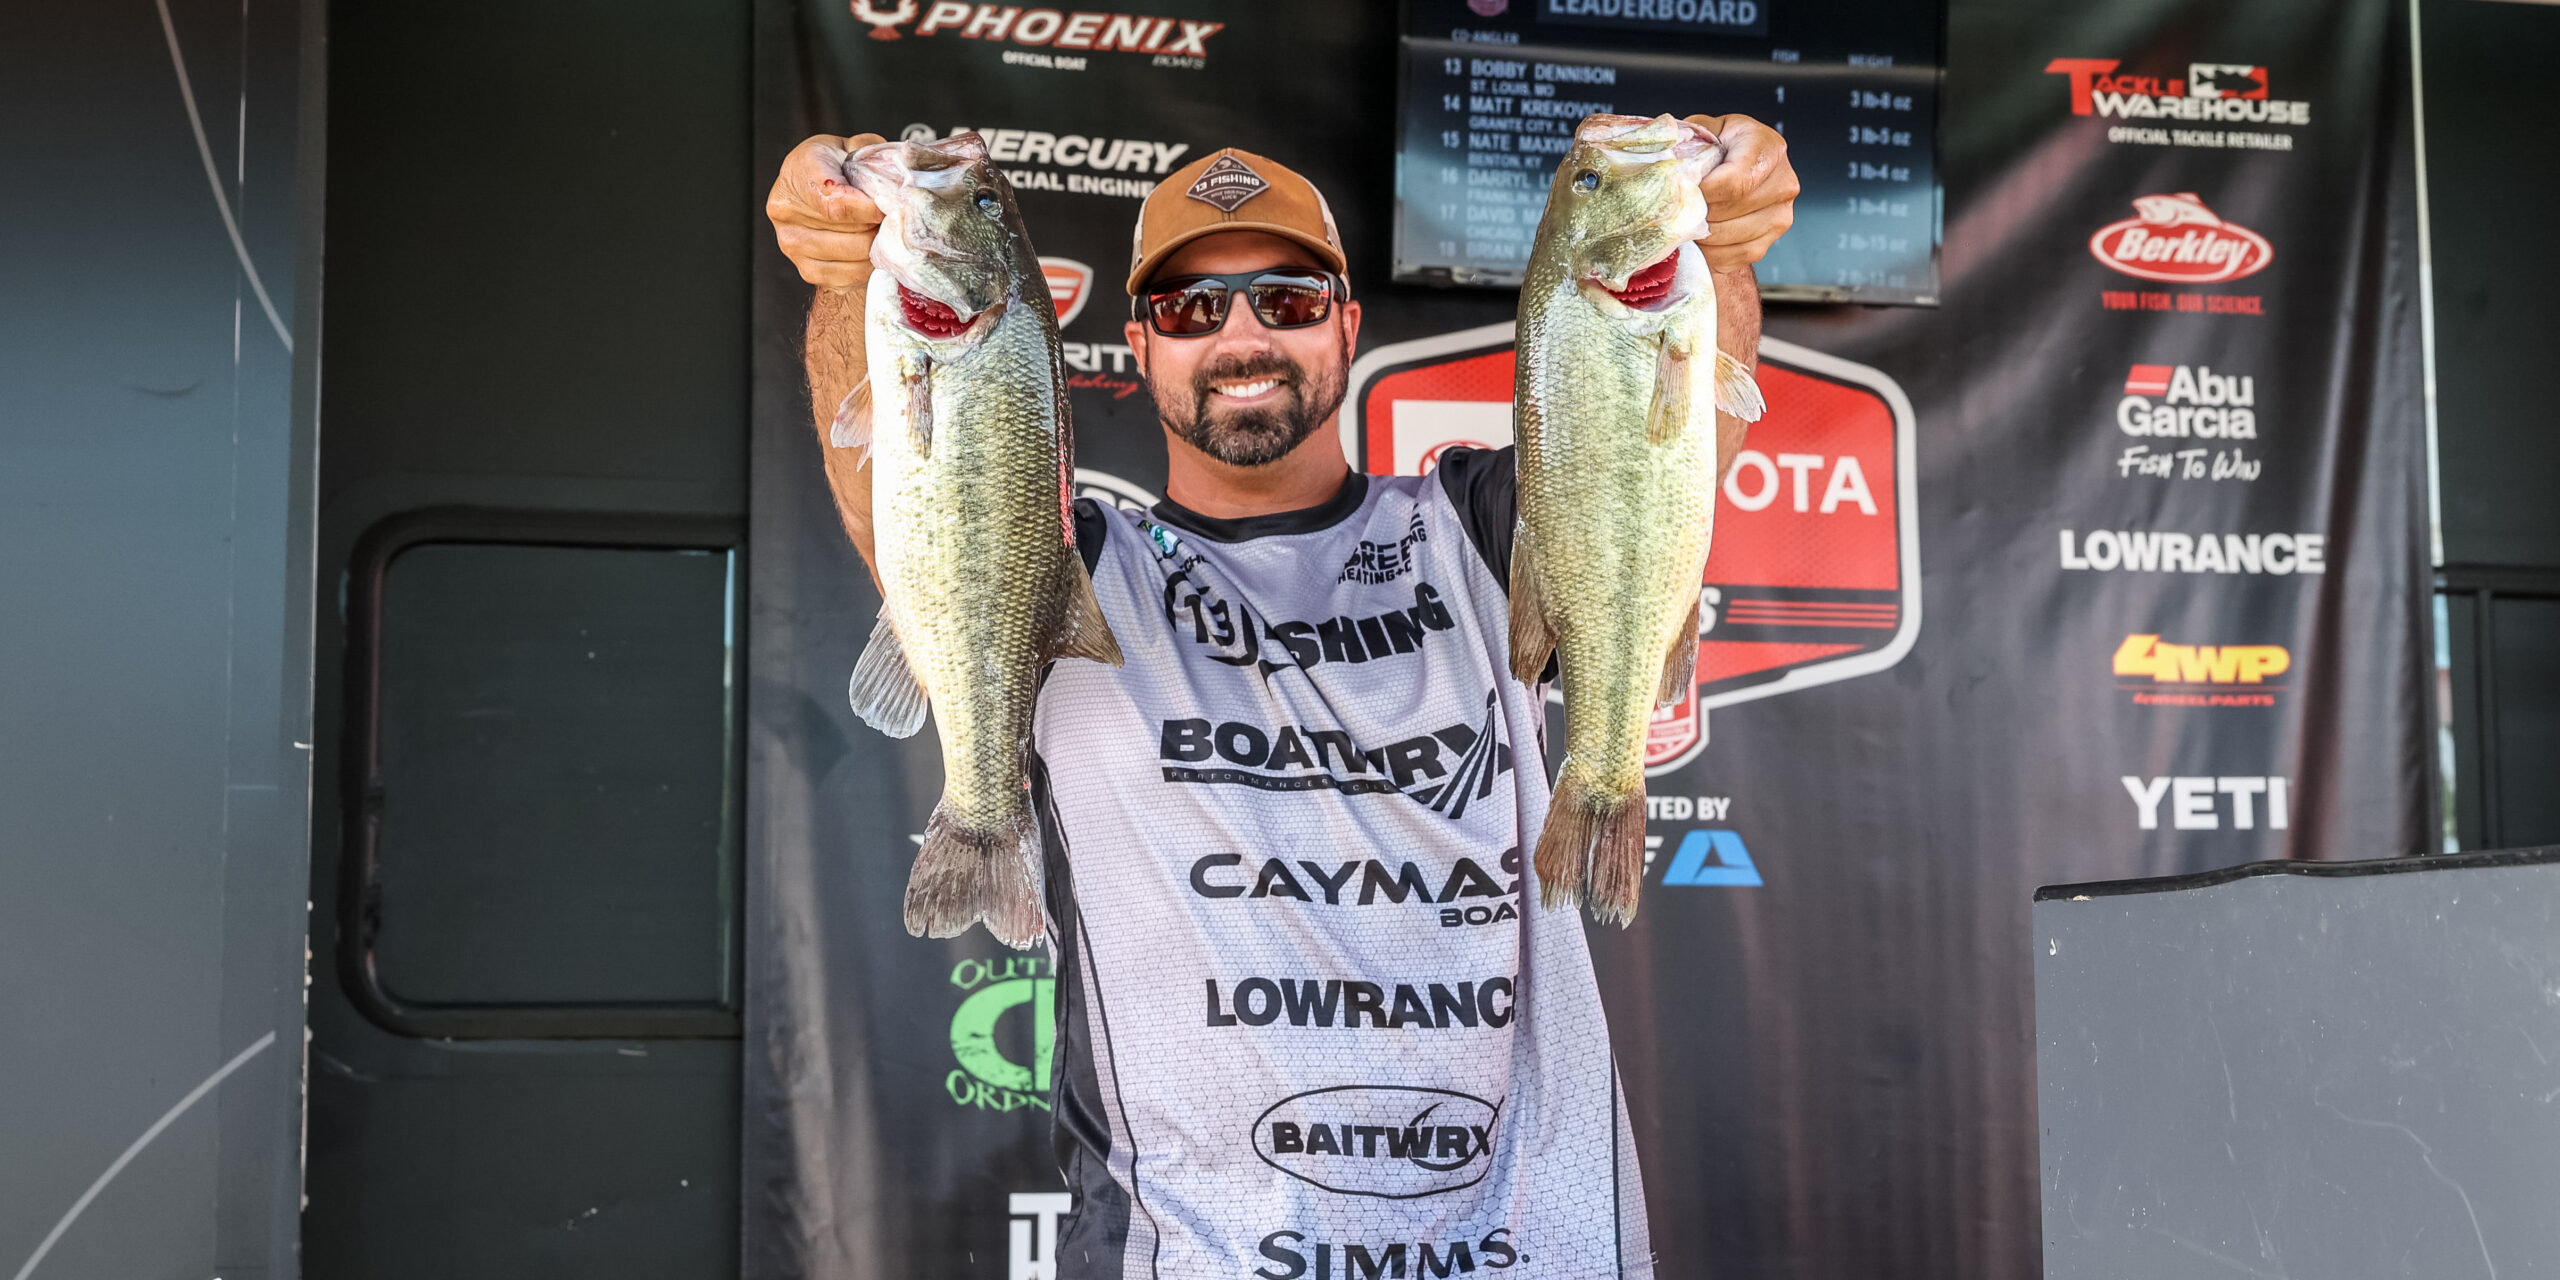 Schutta Out in Front With 18 Pounds on Day 1 at Truman - Major